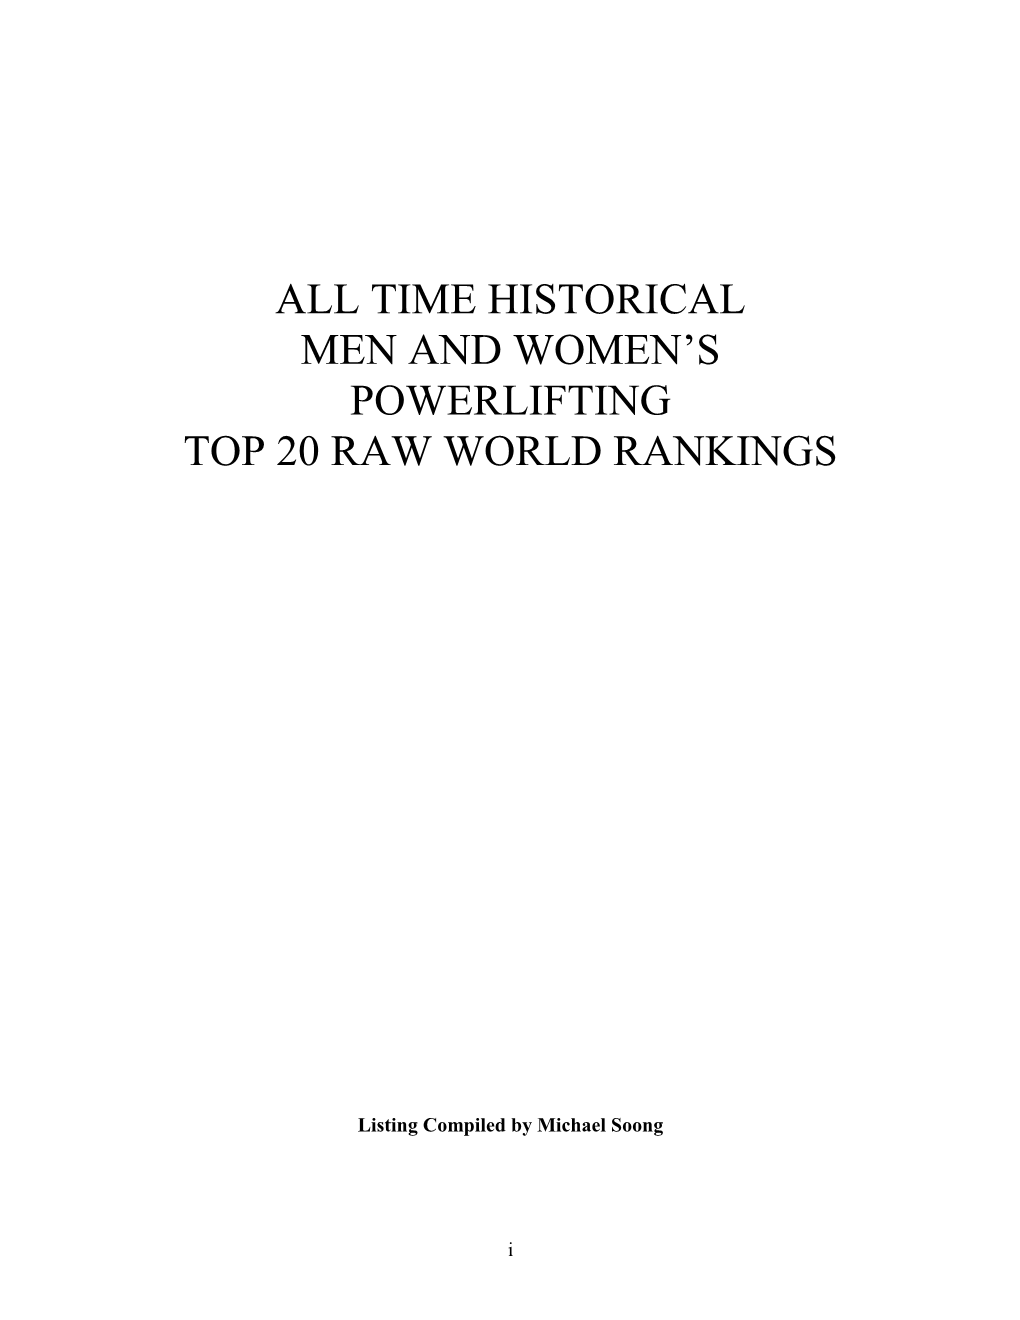 All Time Historical Men and Women's